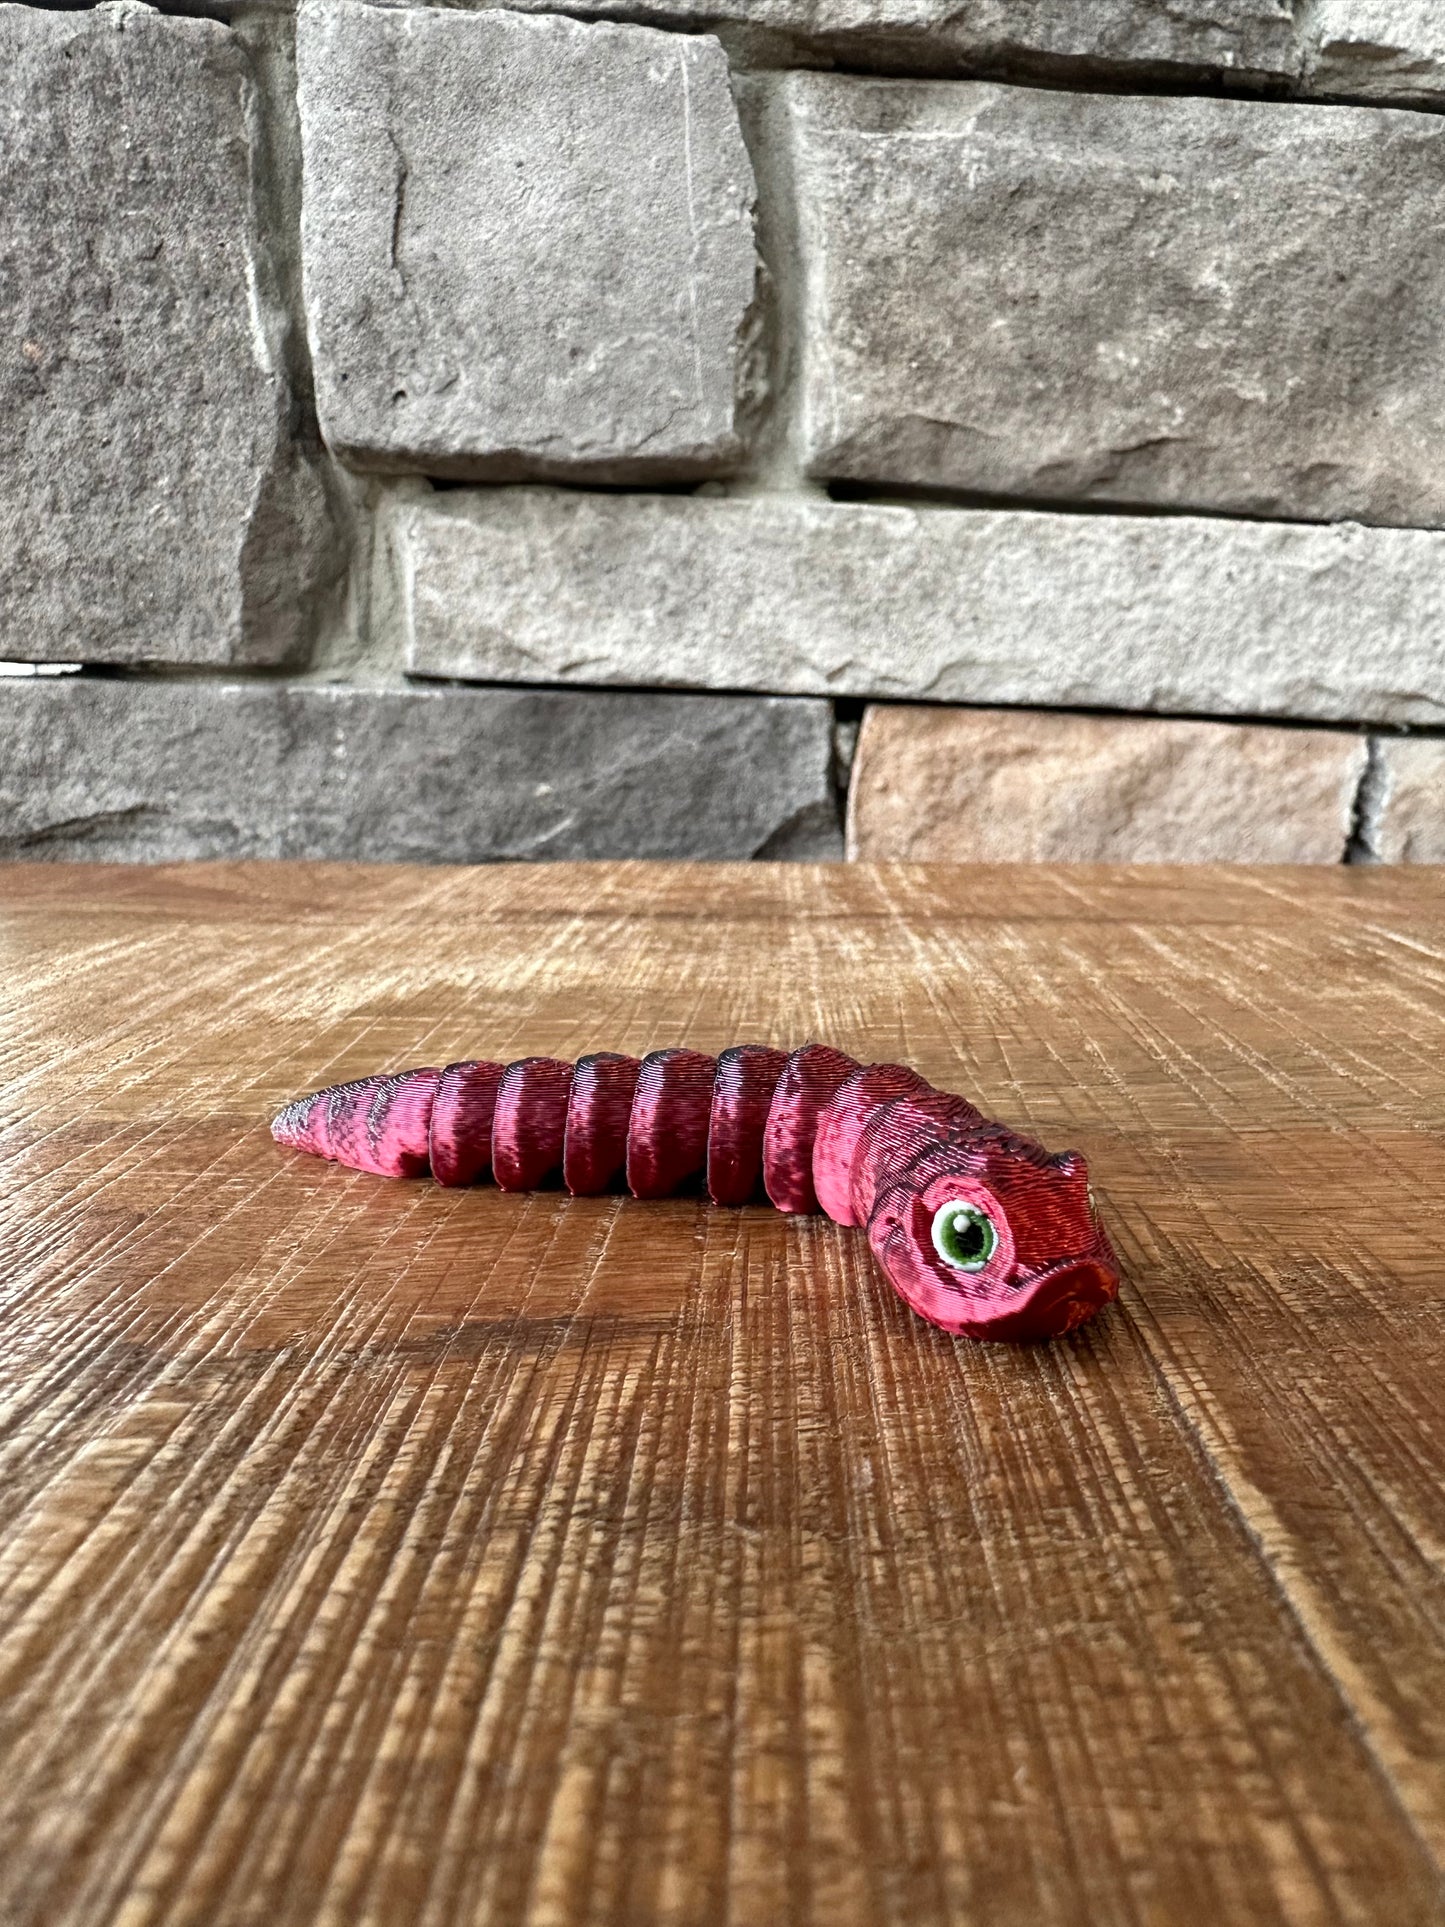 Tiny Hognose Snake | Tiny Collection | Multi Filament | 3D Printed | Articulated Flexible | Custom Fidget Toy